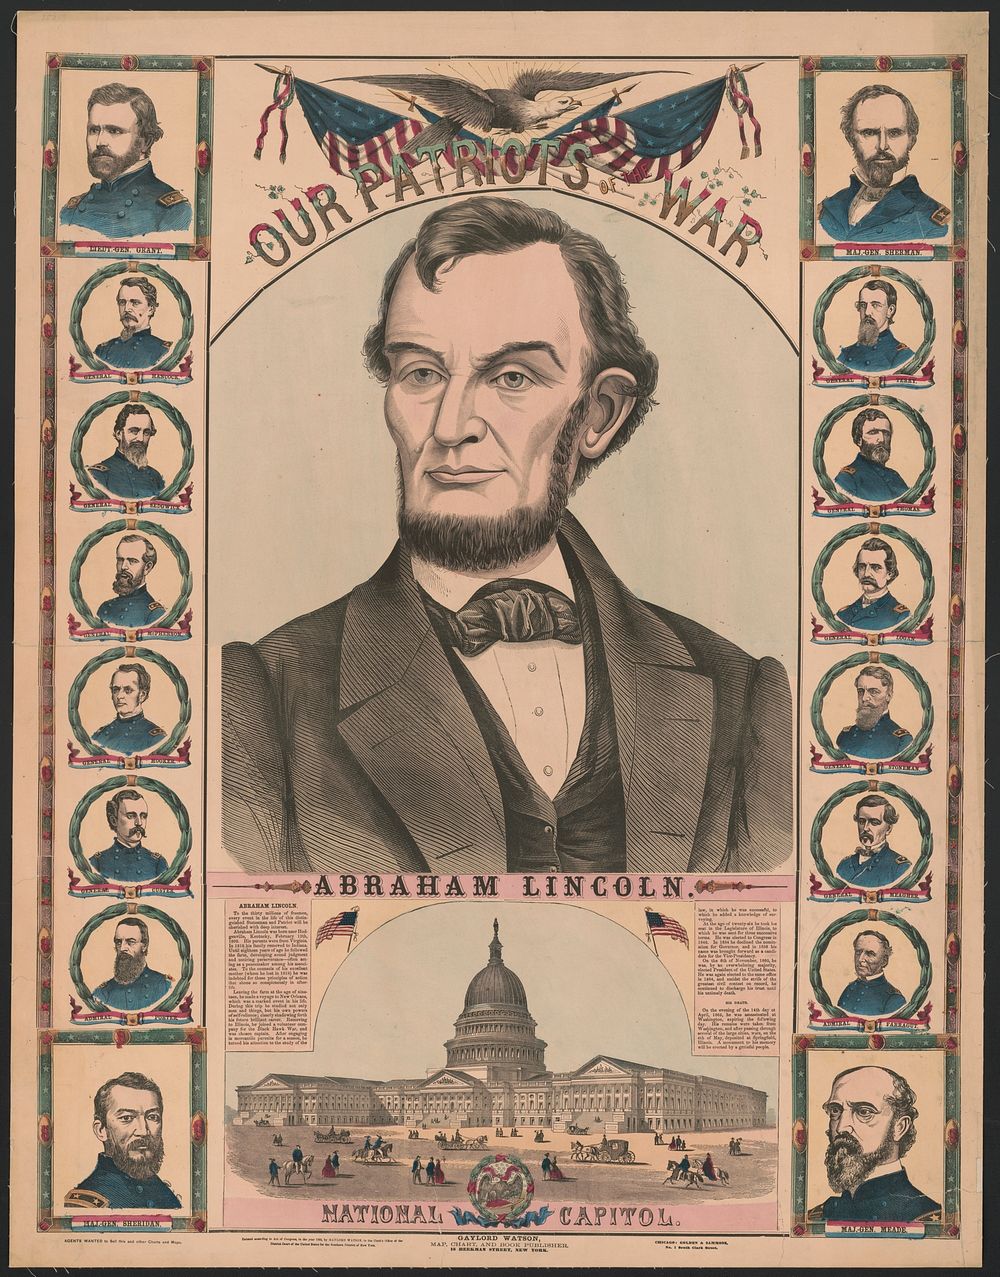 Our patriots of the war, Abraham Lincoln